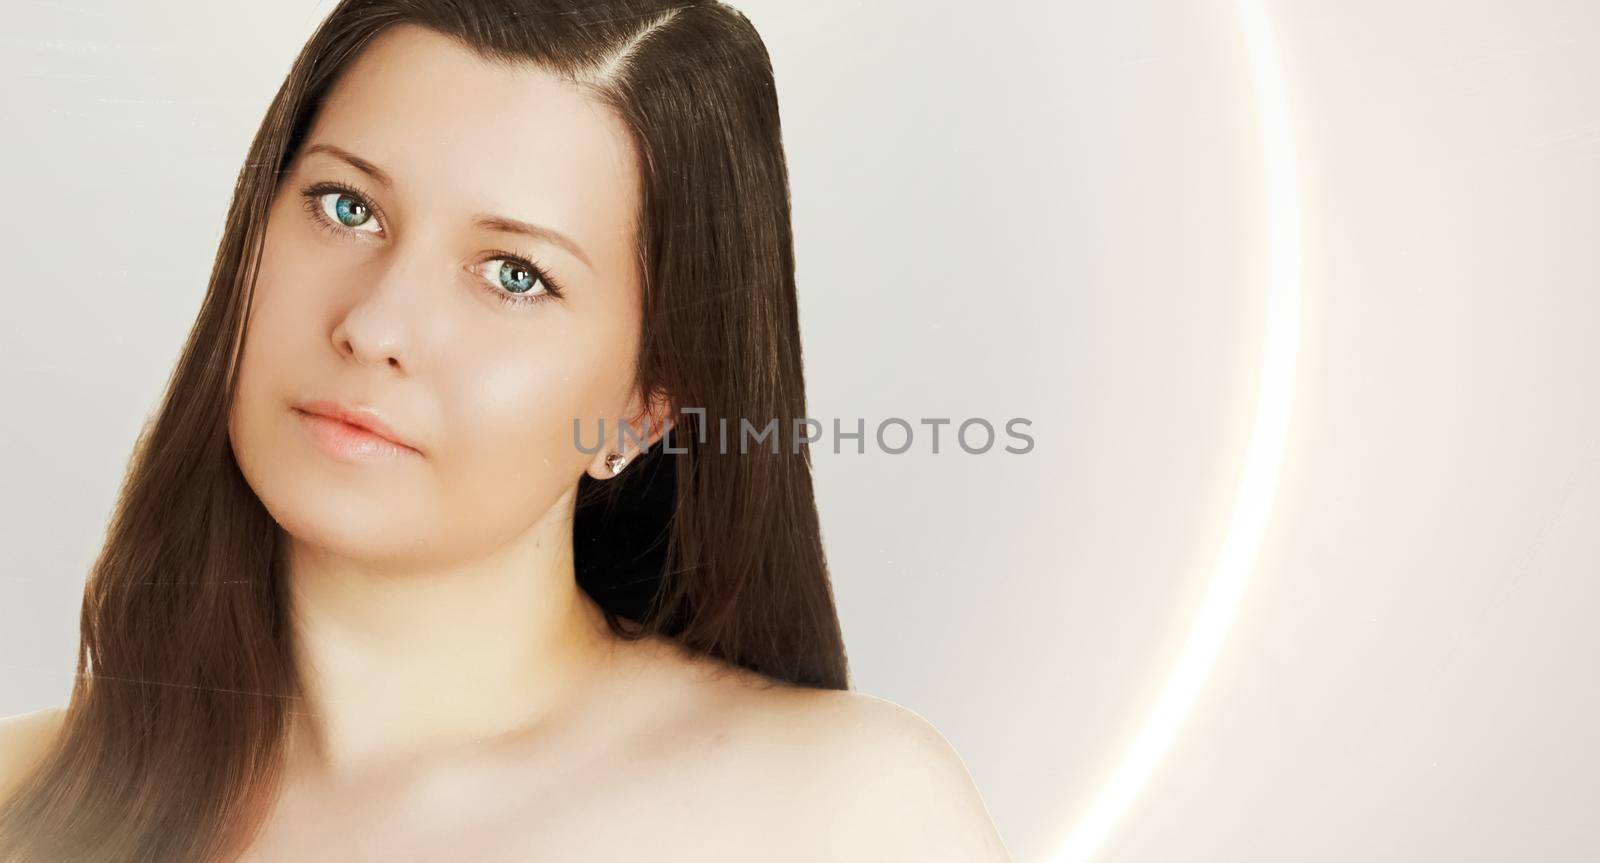 Suntan skin tone and beauty routine. Beautiful brunette female model with natural tan, face portrait of young woman.